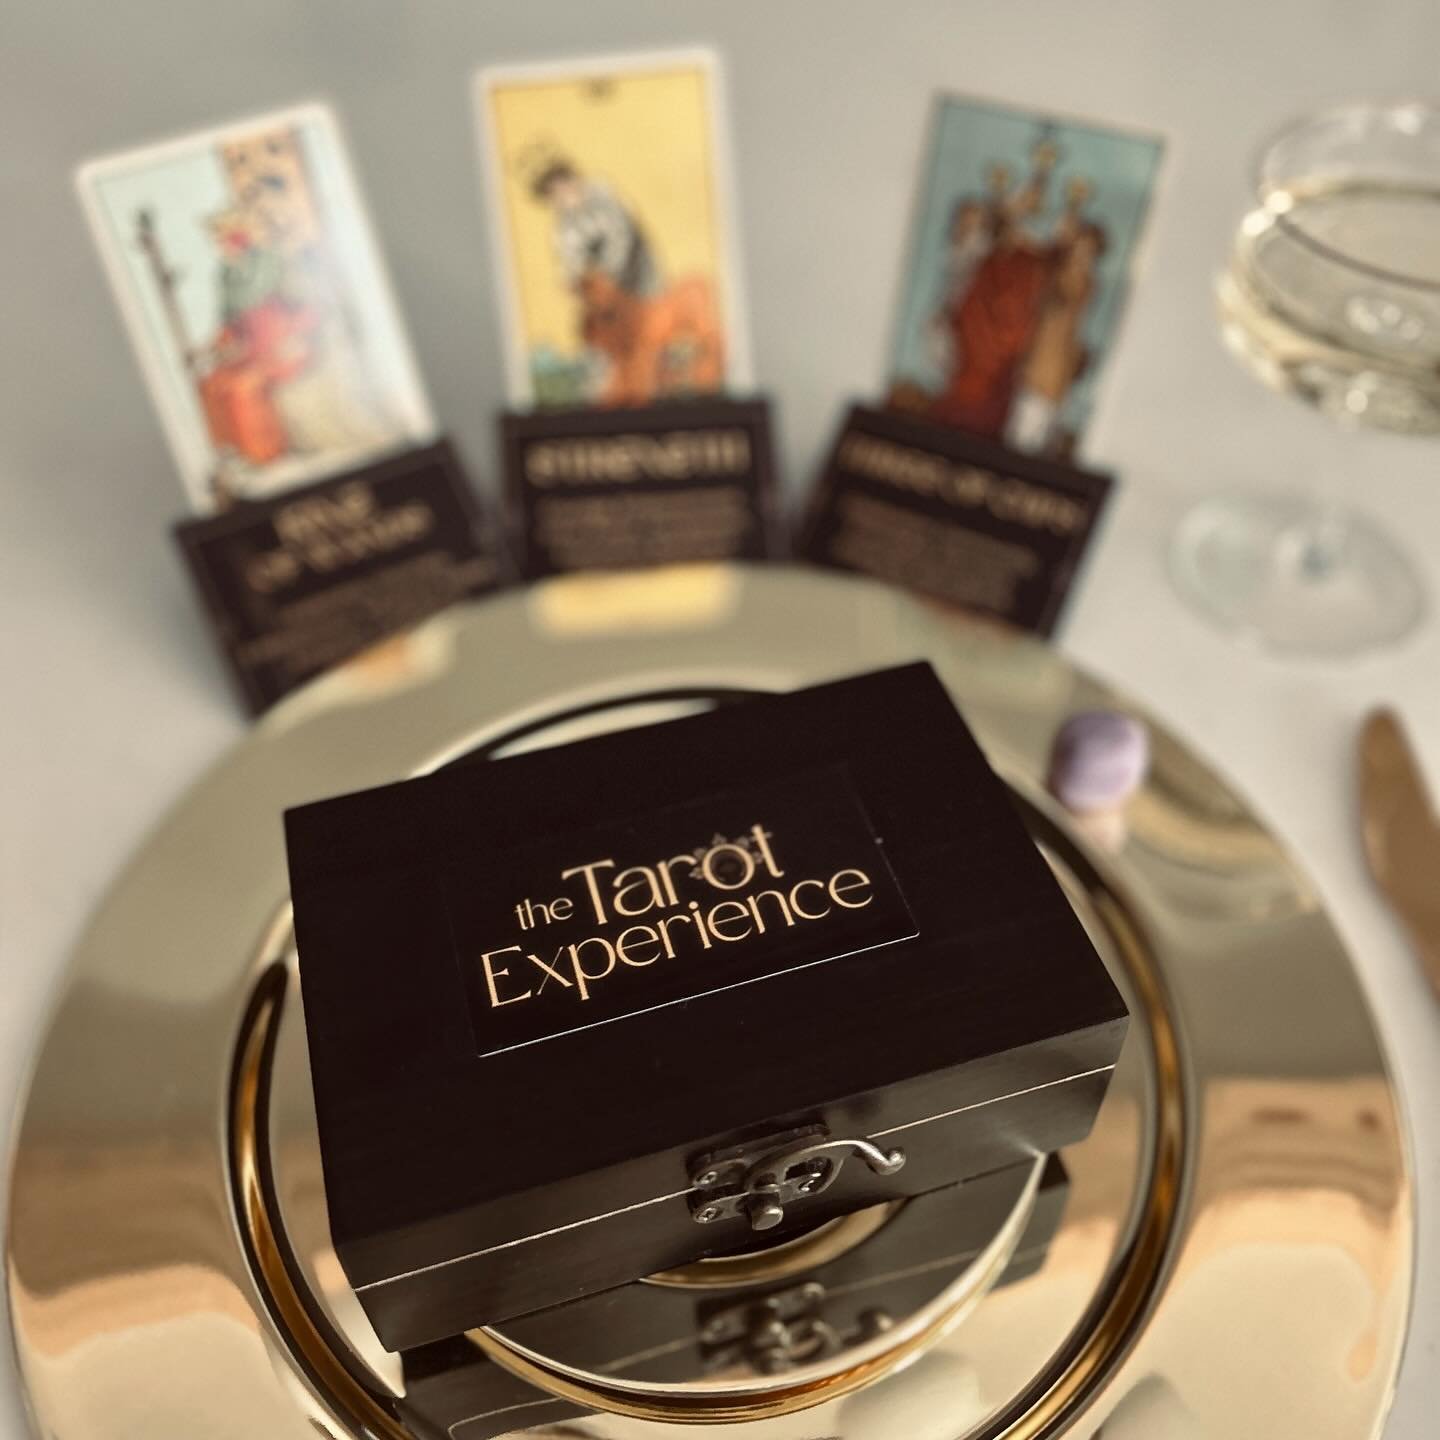 The Tarot Experience - 1 spot left!

Join Rachelle Barkhurst for an intimate evening of bites, beverages and the tarot. 

She will guide you through the evening as you receive a 3-card tarot pull &amp; collective reading. Connect with others. Indulge